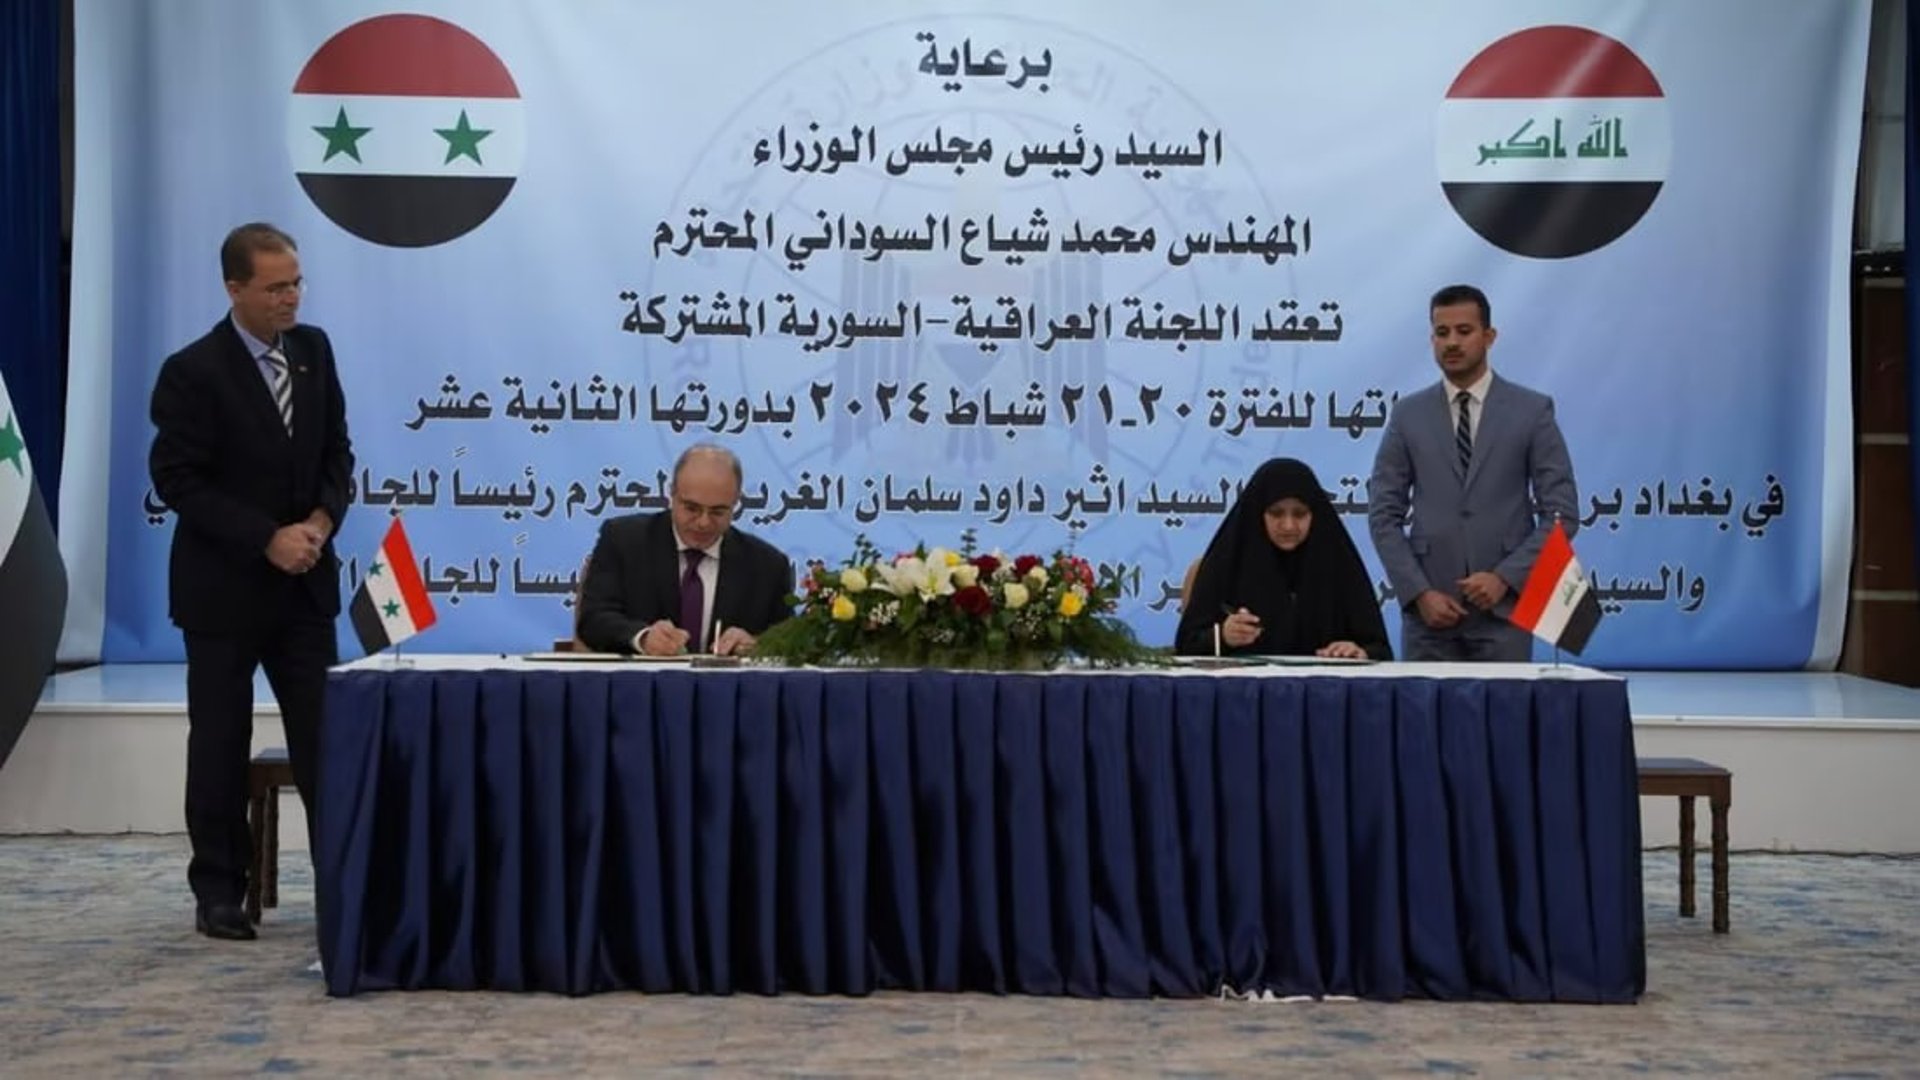 Iraq and Syria sign deal to enhance telecommunication and cybersecurity cooperation